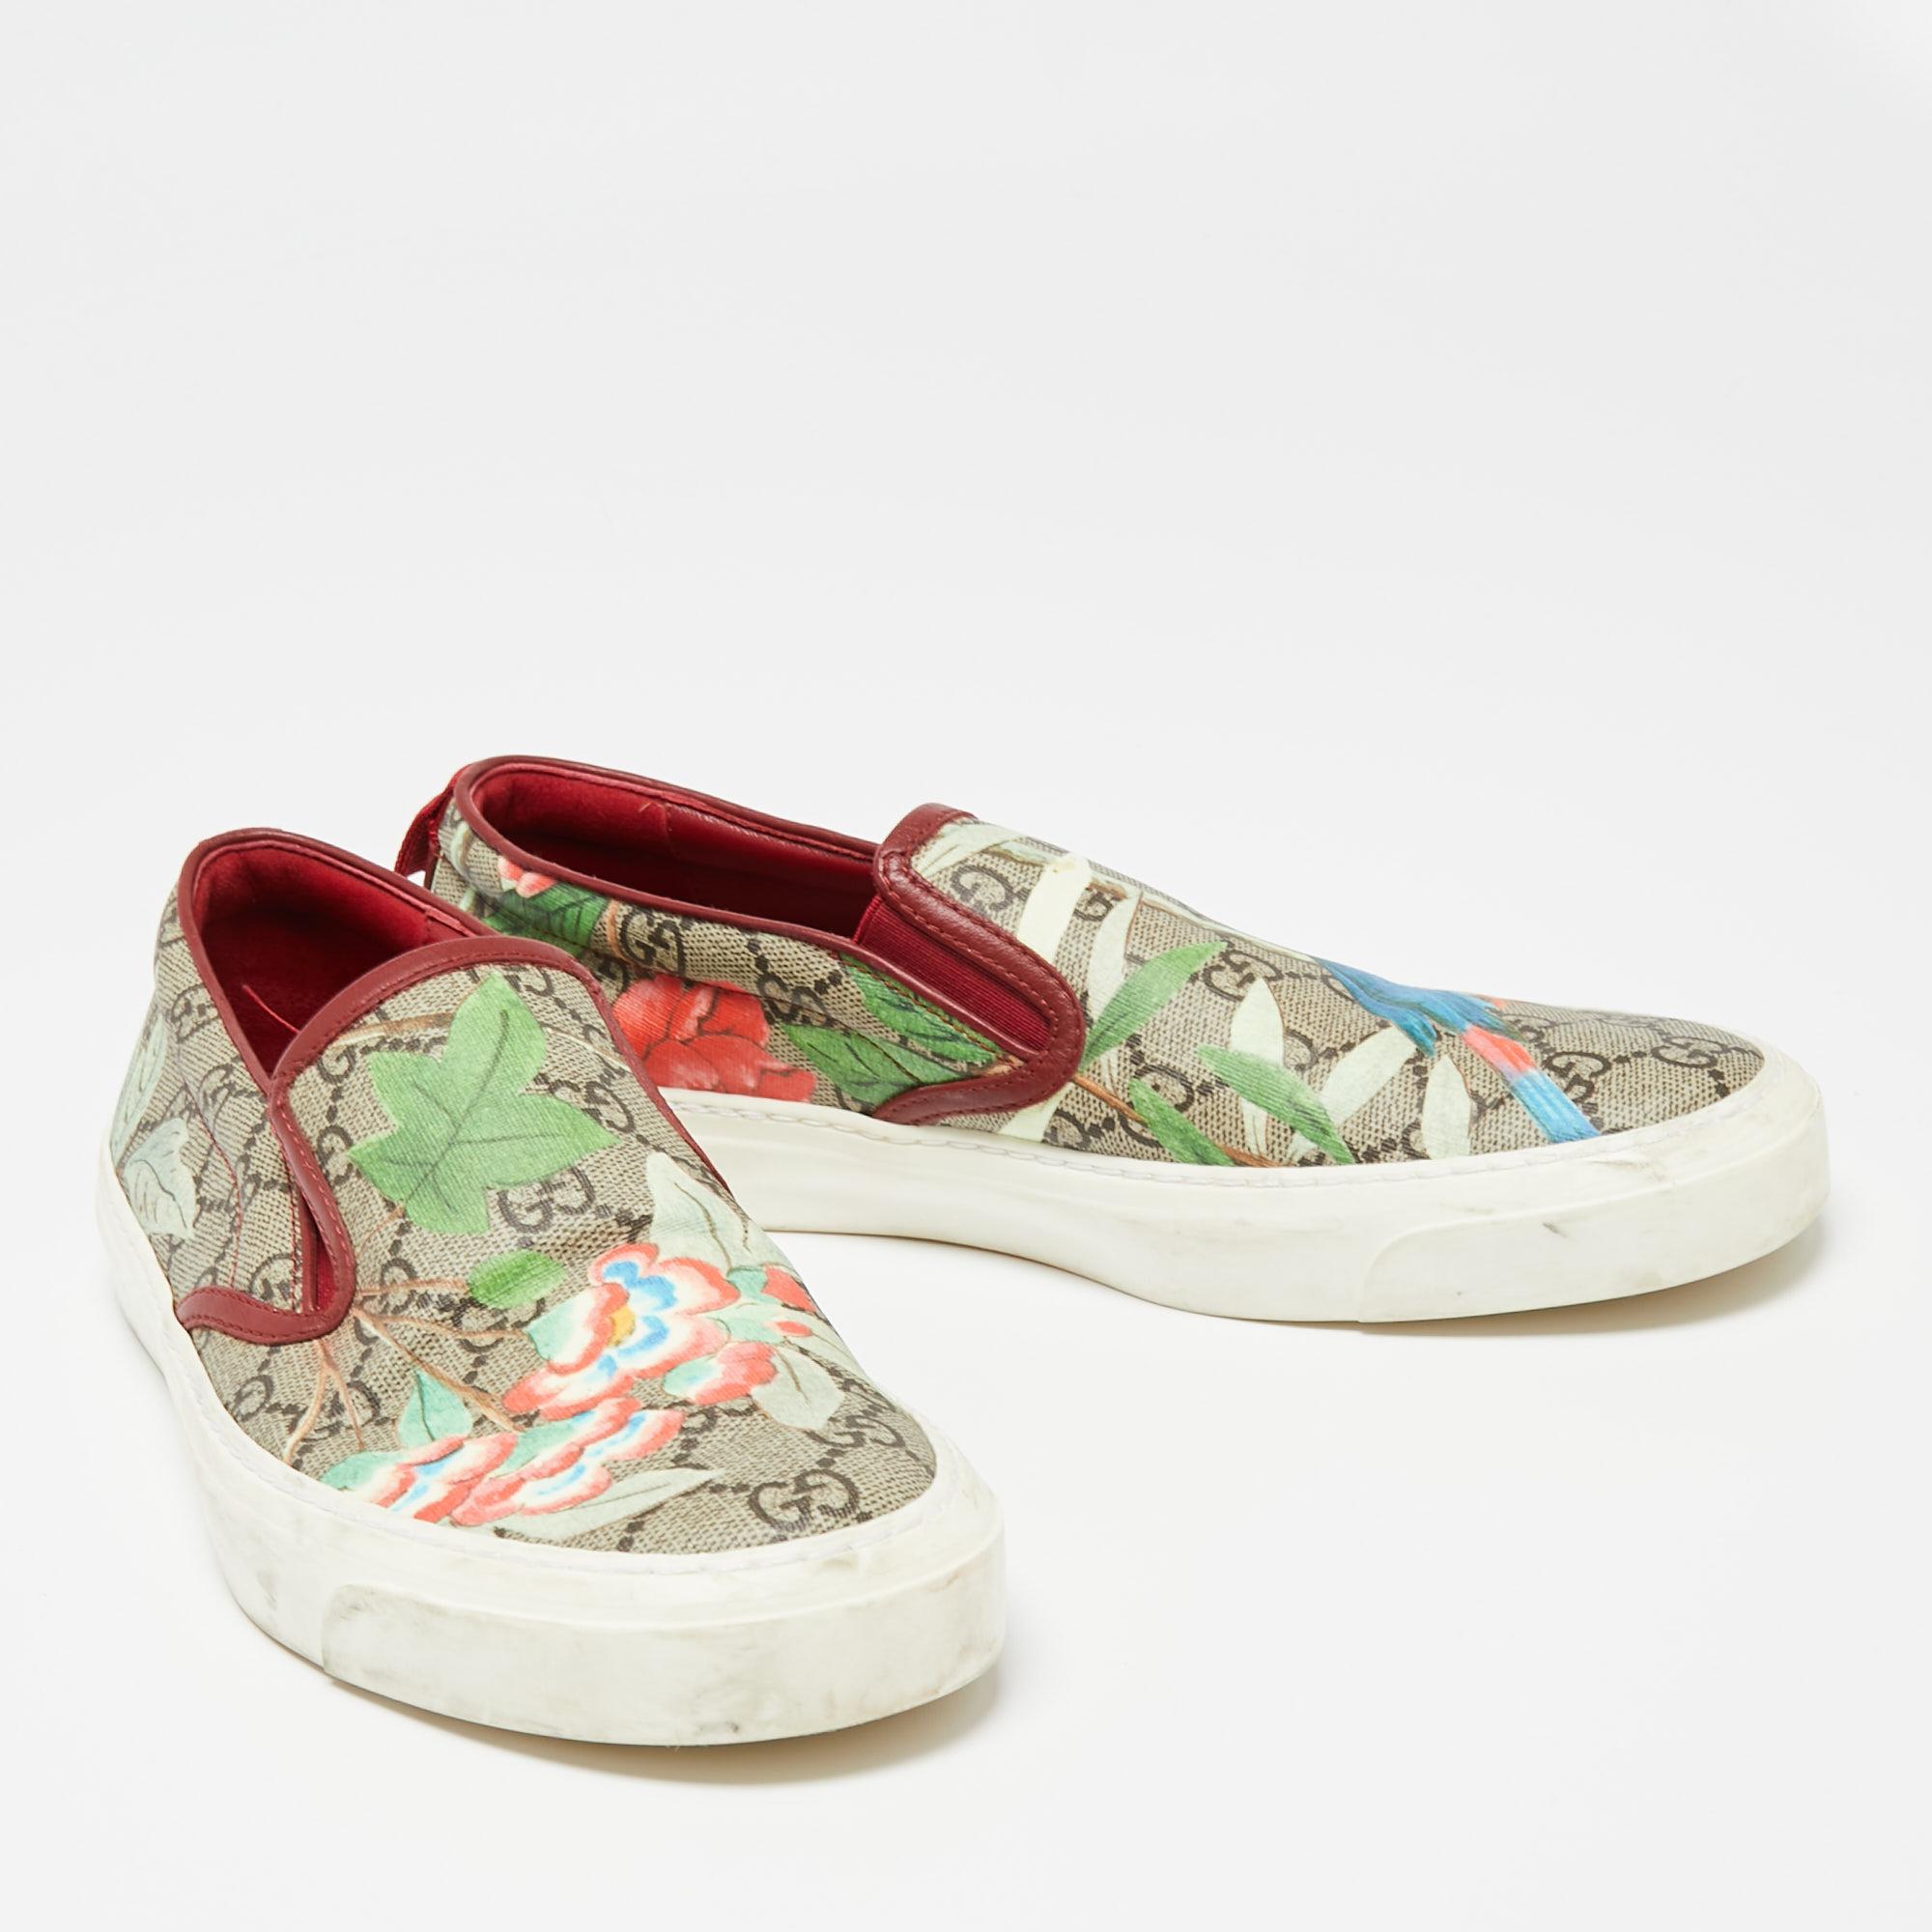 Beige Gucci Multicolor GG Supreme Blooms Printed Canvas Slip On Sneakers Size 40